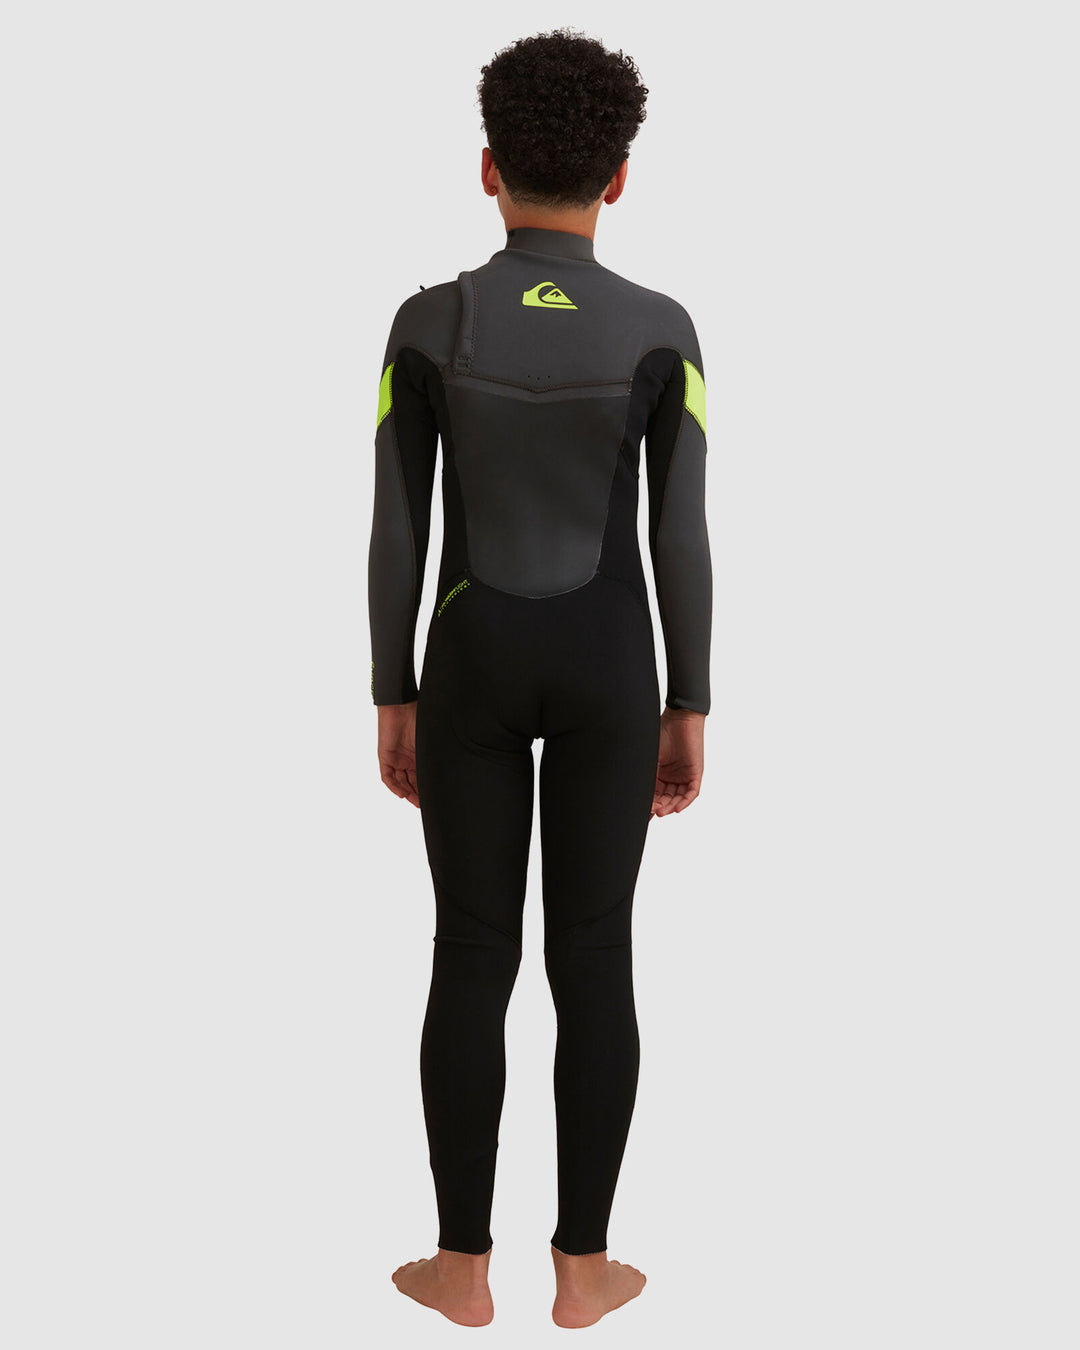 Boys Syncro 3/2mm Chest Zip GBS Sealed Steamer Kids Wetsuit - Jet Black/Yellow